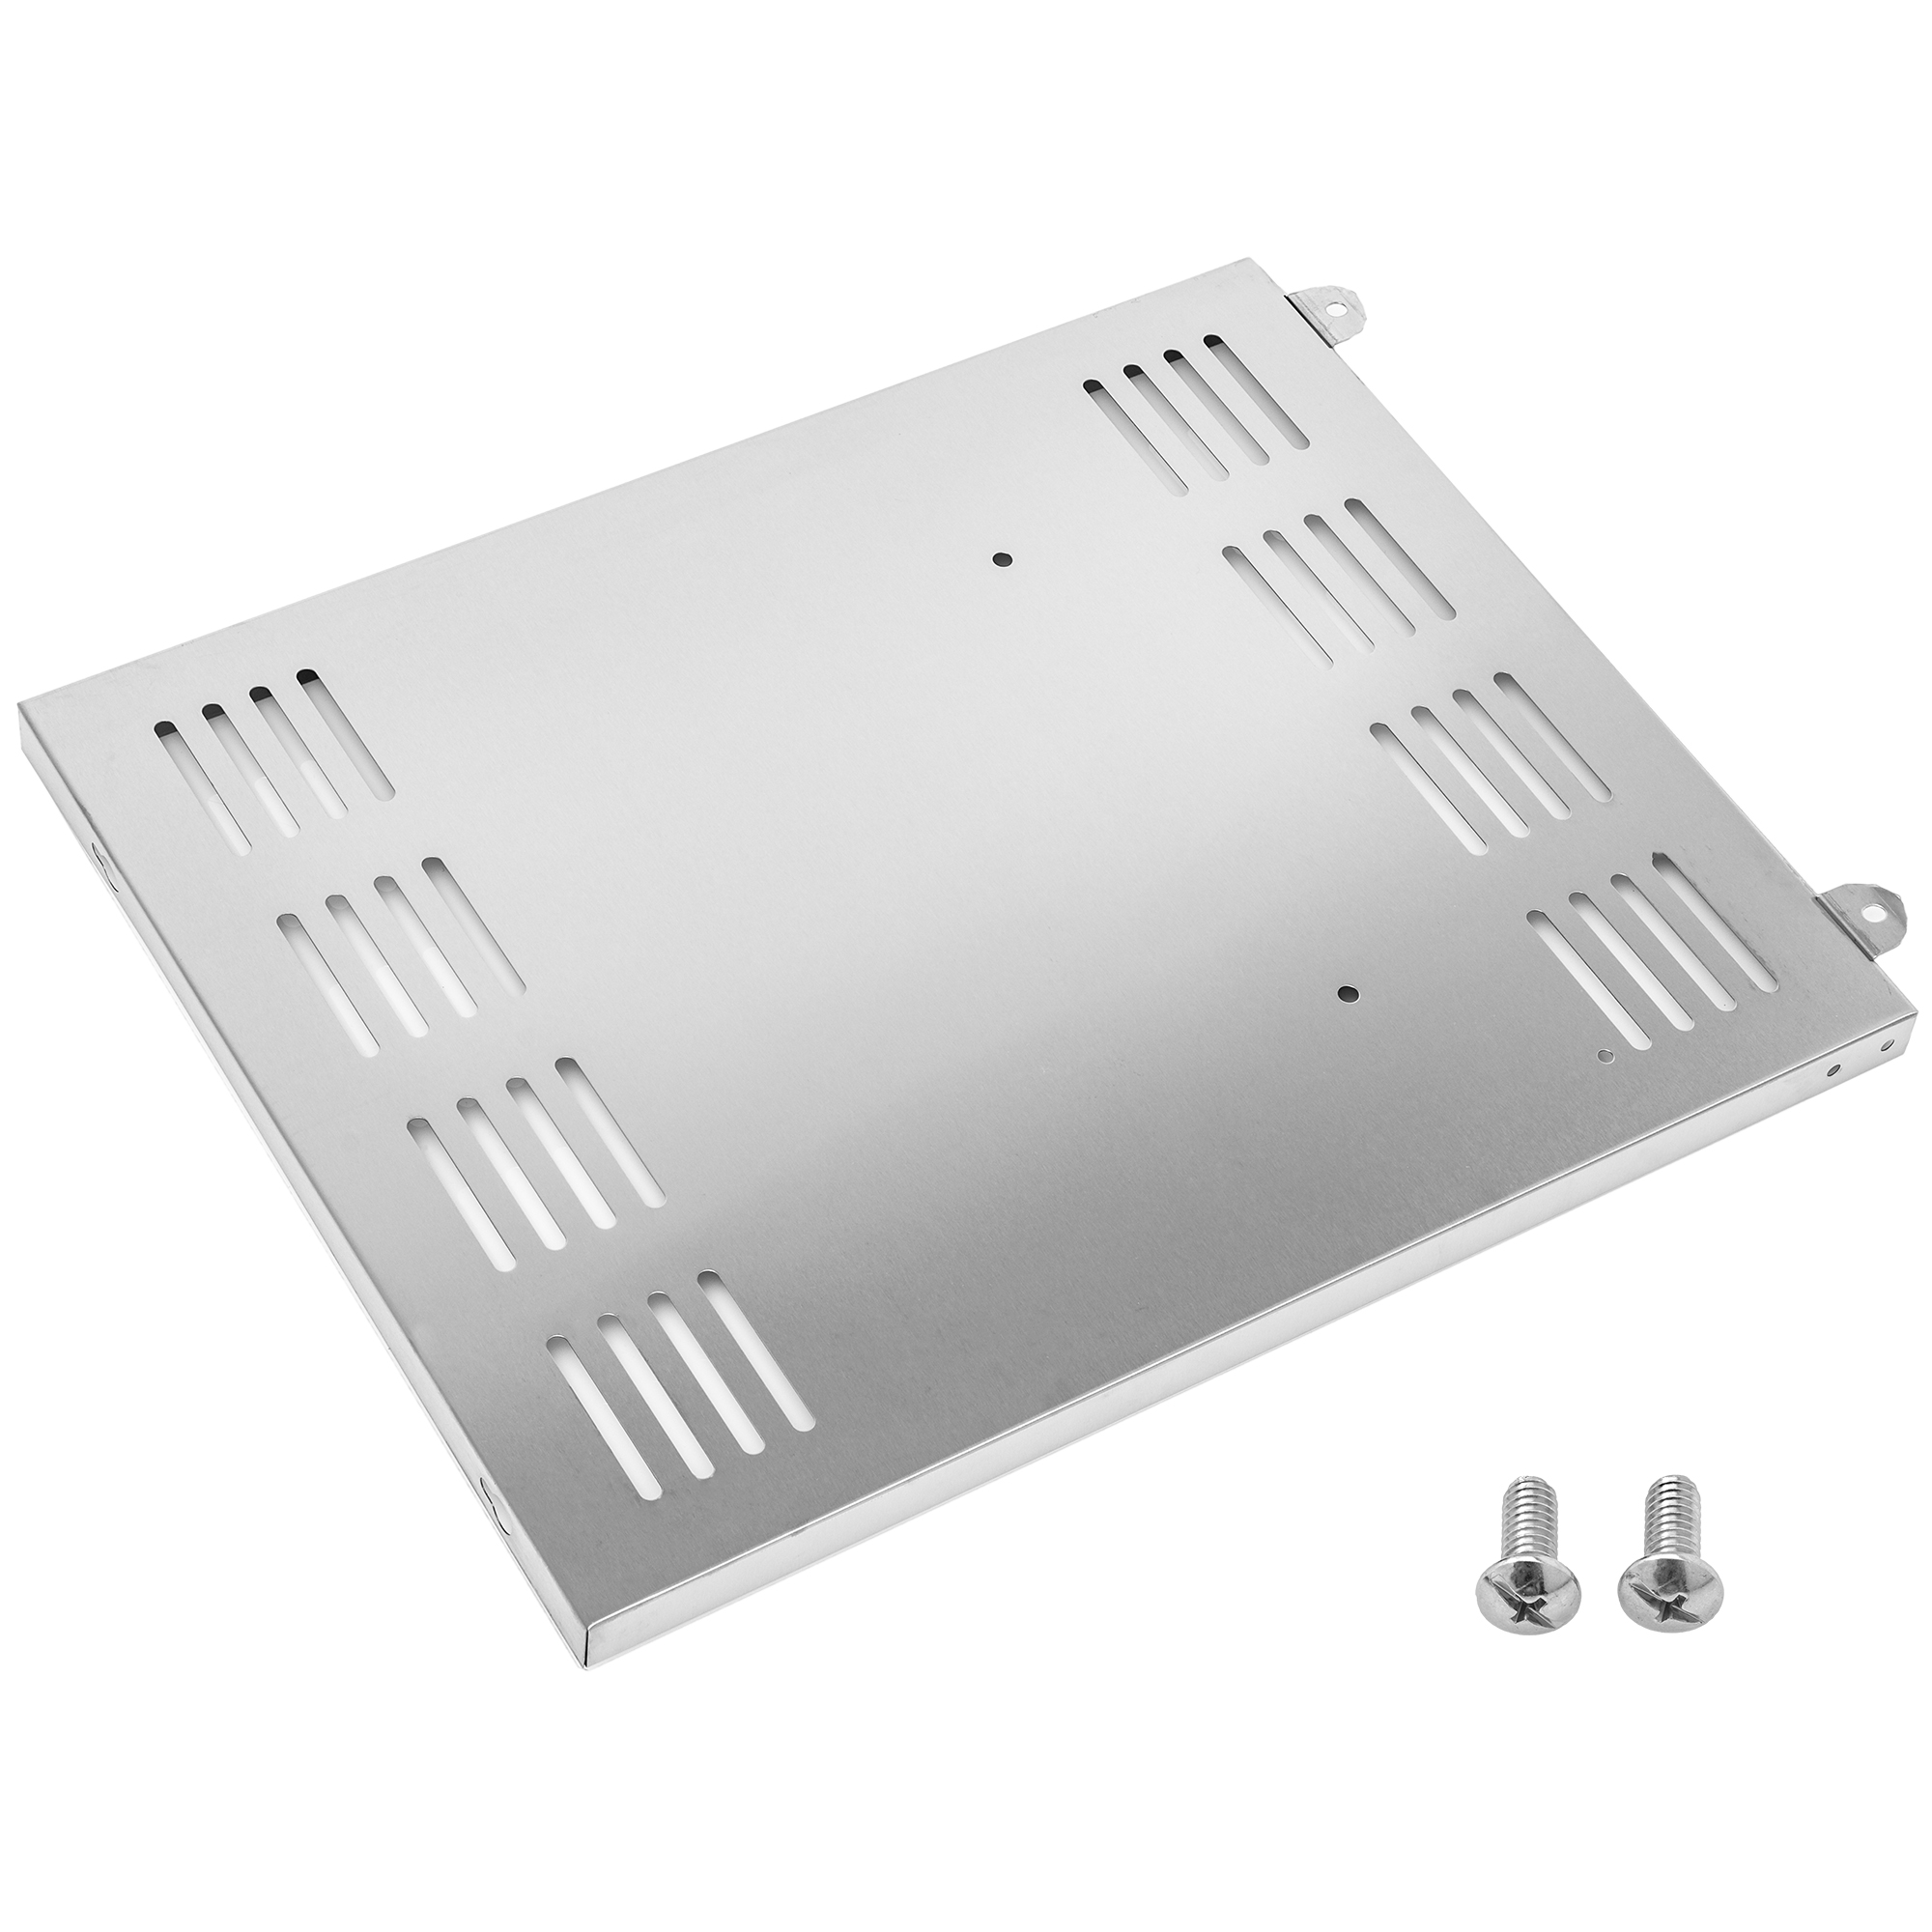 Cabinet left side panel Videro  G3/G3-S, G4/G4-S, G6/G6-S stainless steel